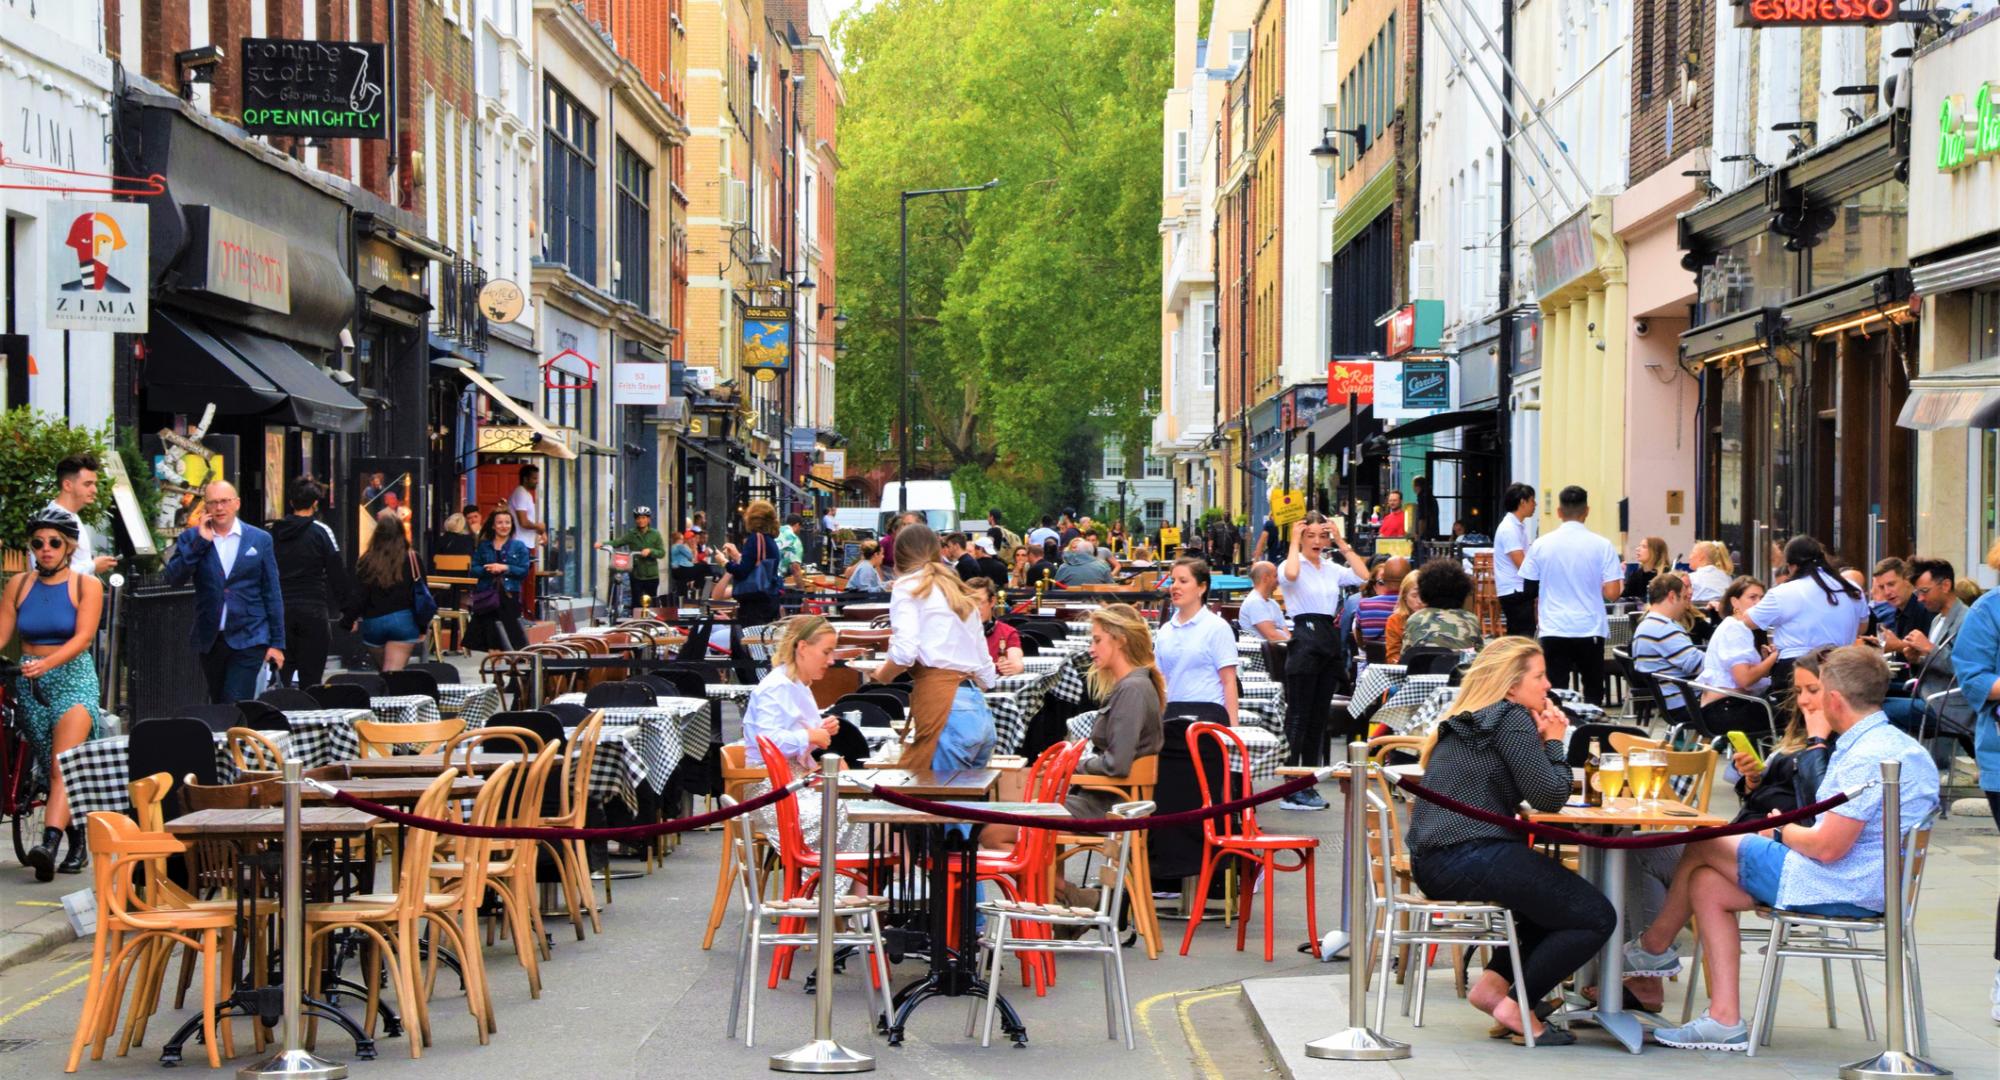 Outdoor seating in Soho, London